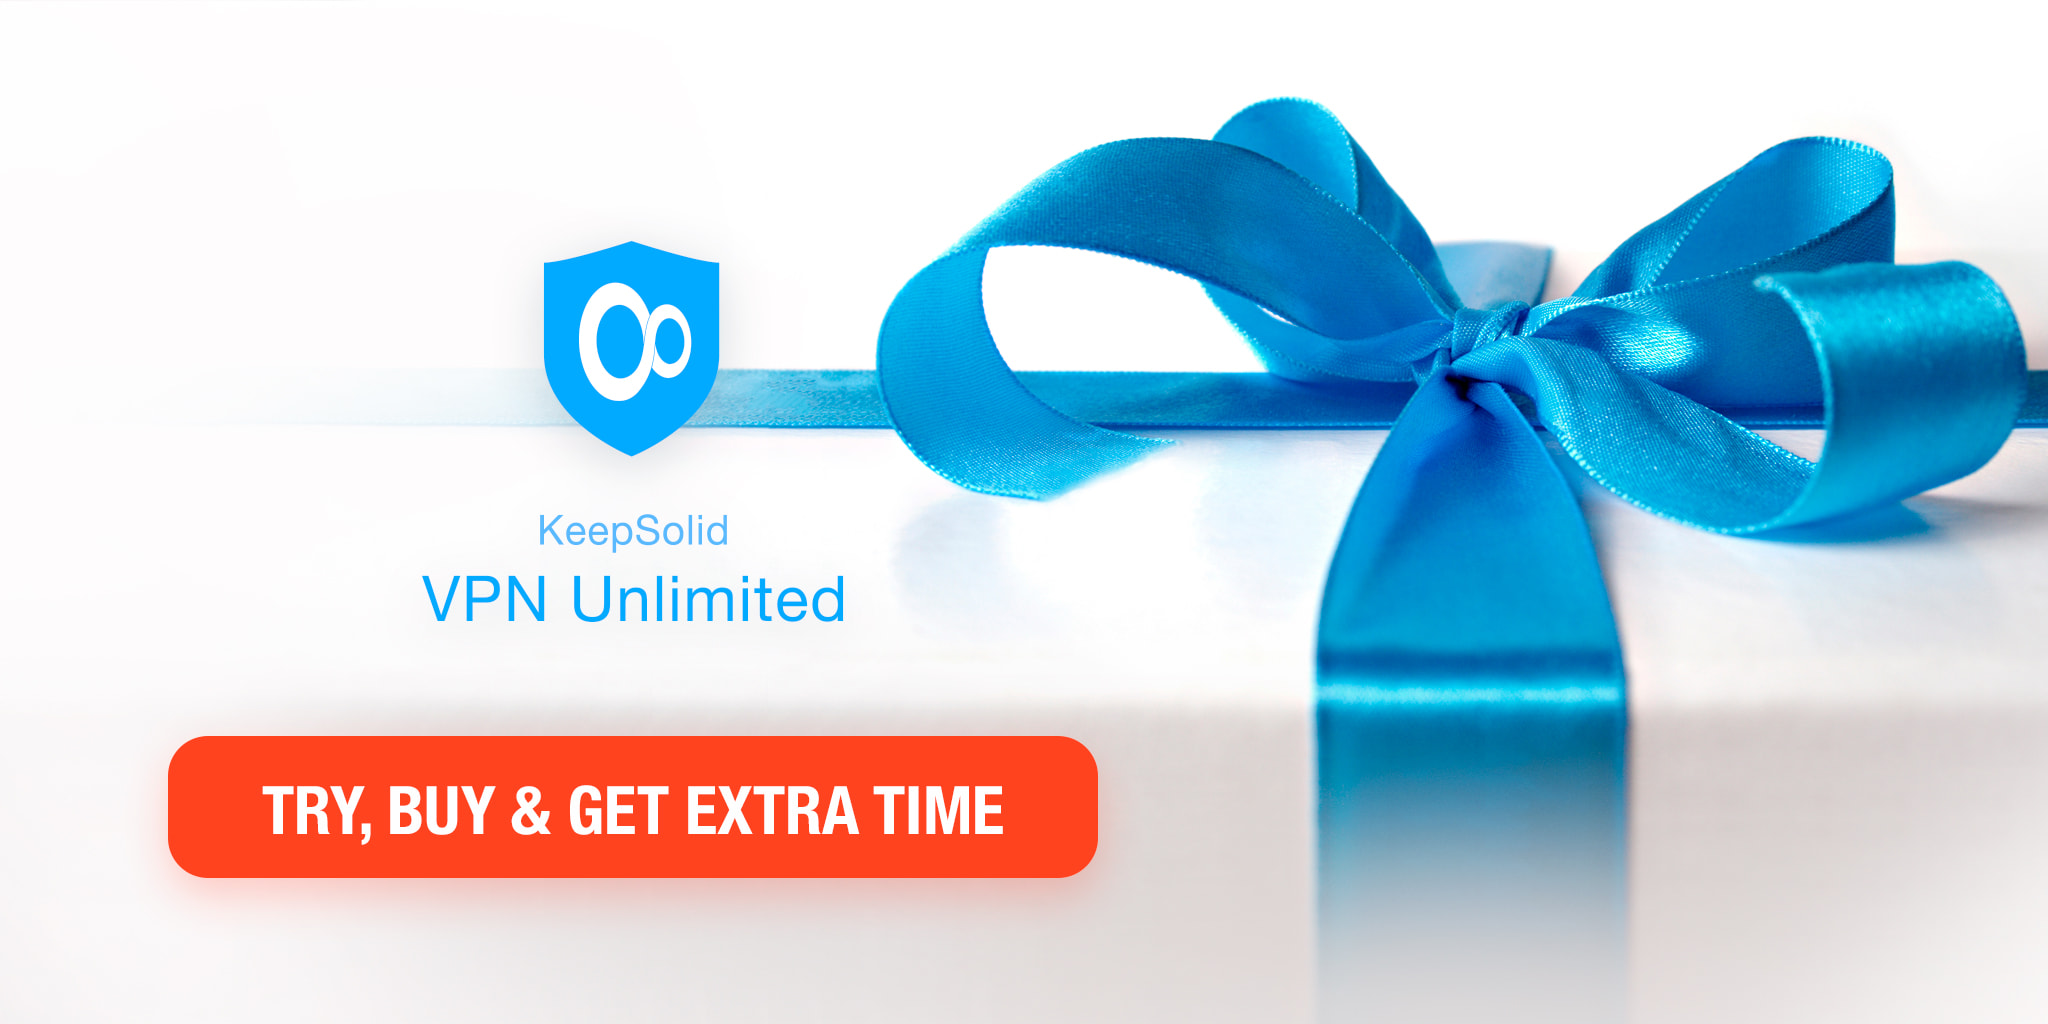 Get additional 10% bonus time to your KeepSolid VPN Unlimited subscription